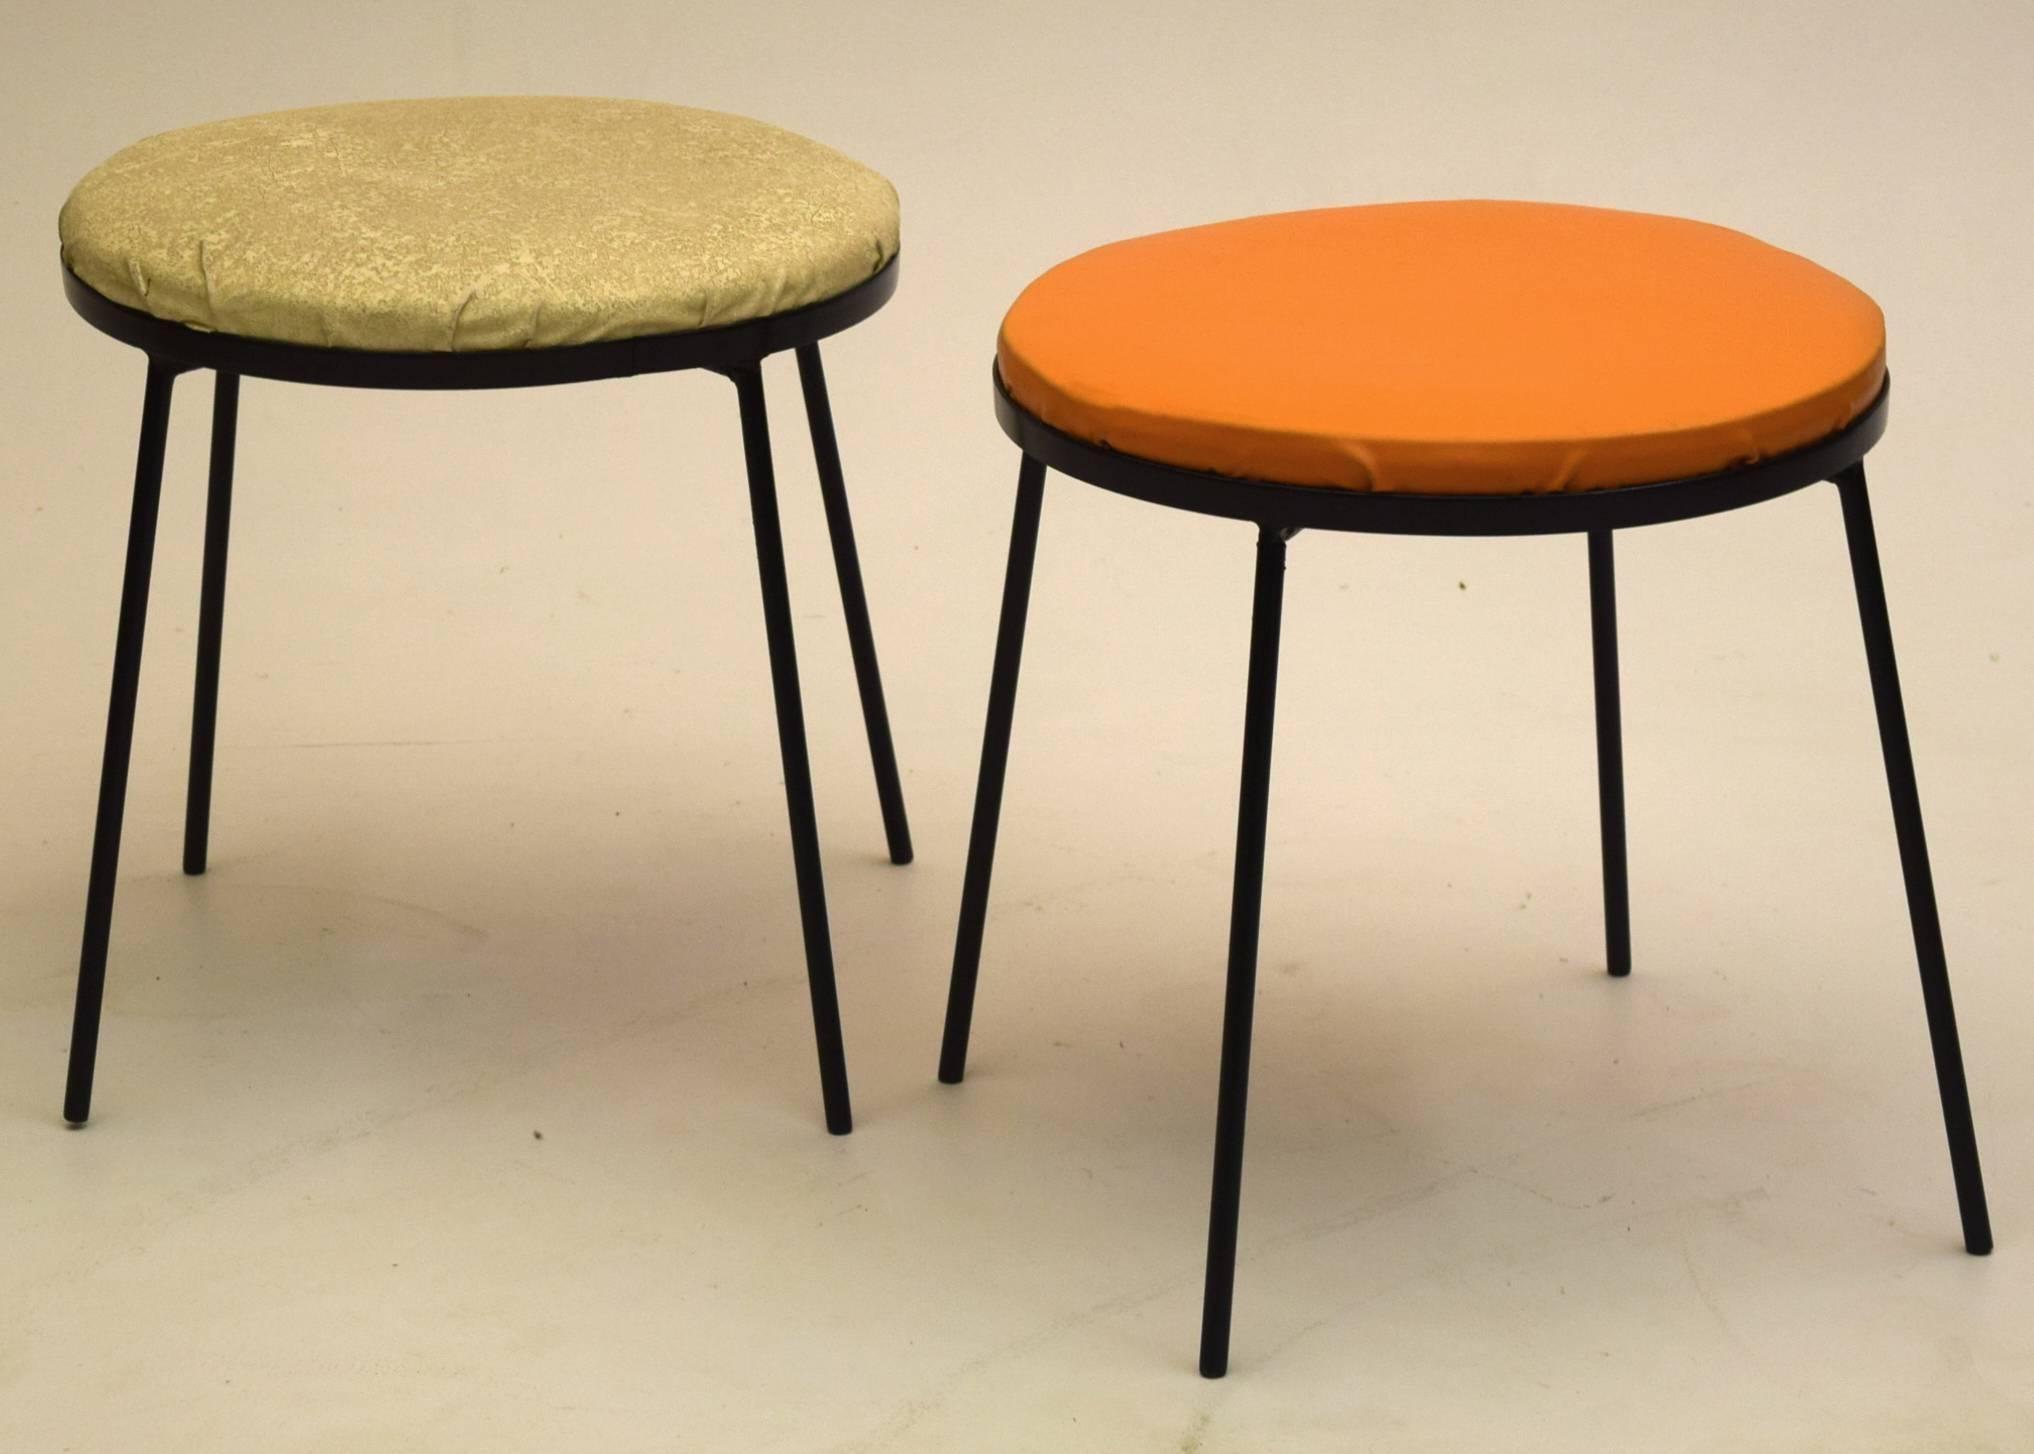 Frederic Weinberg, circa 1955.

A hard to find Minimalist round stool by Frederic Weinberg in a perfect sherbert like orange. We have two available, the other in off-white with textured pattern. Both are produced with vinyl/leatherette upon wrought